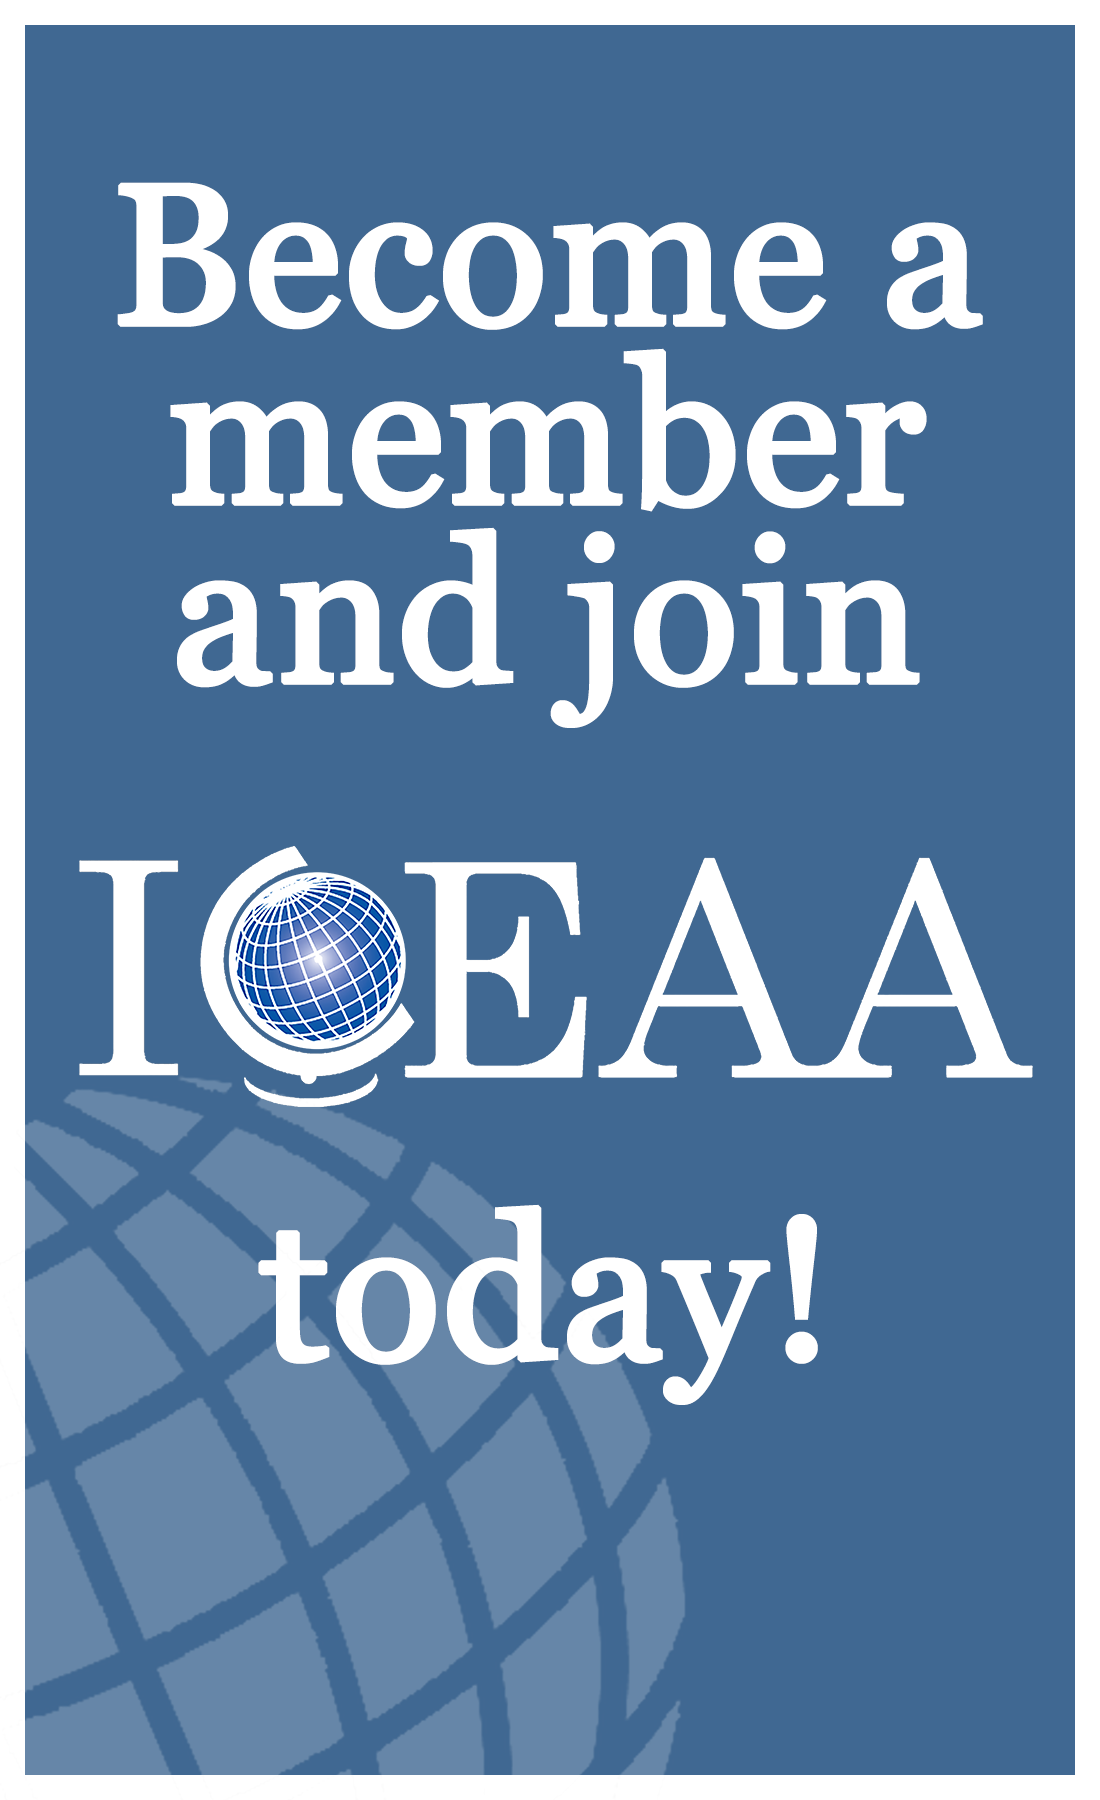 Join ICEAA Today